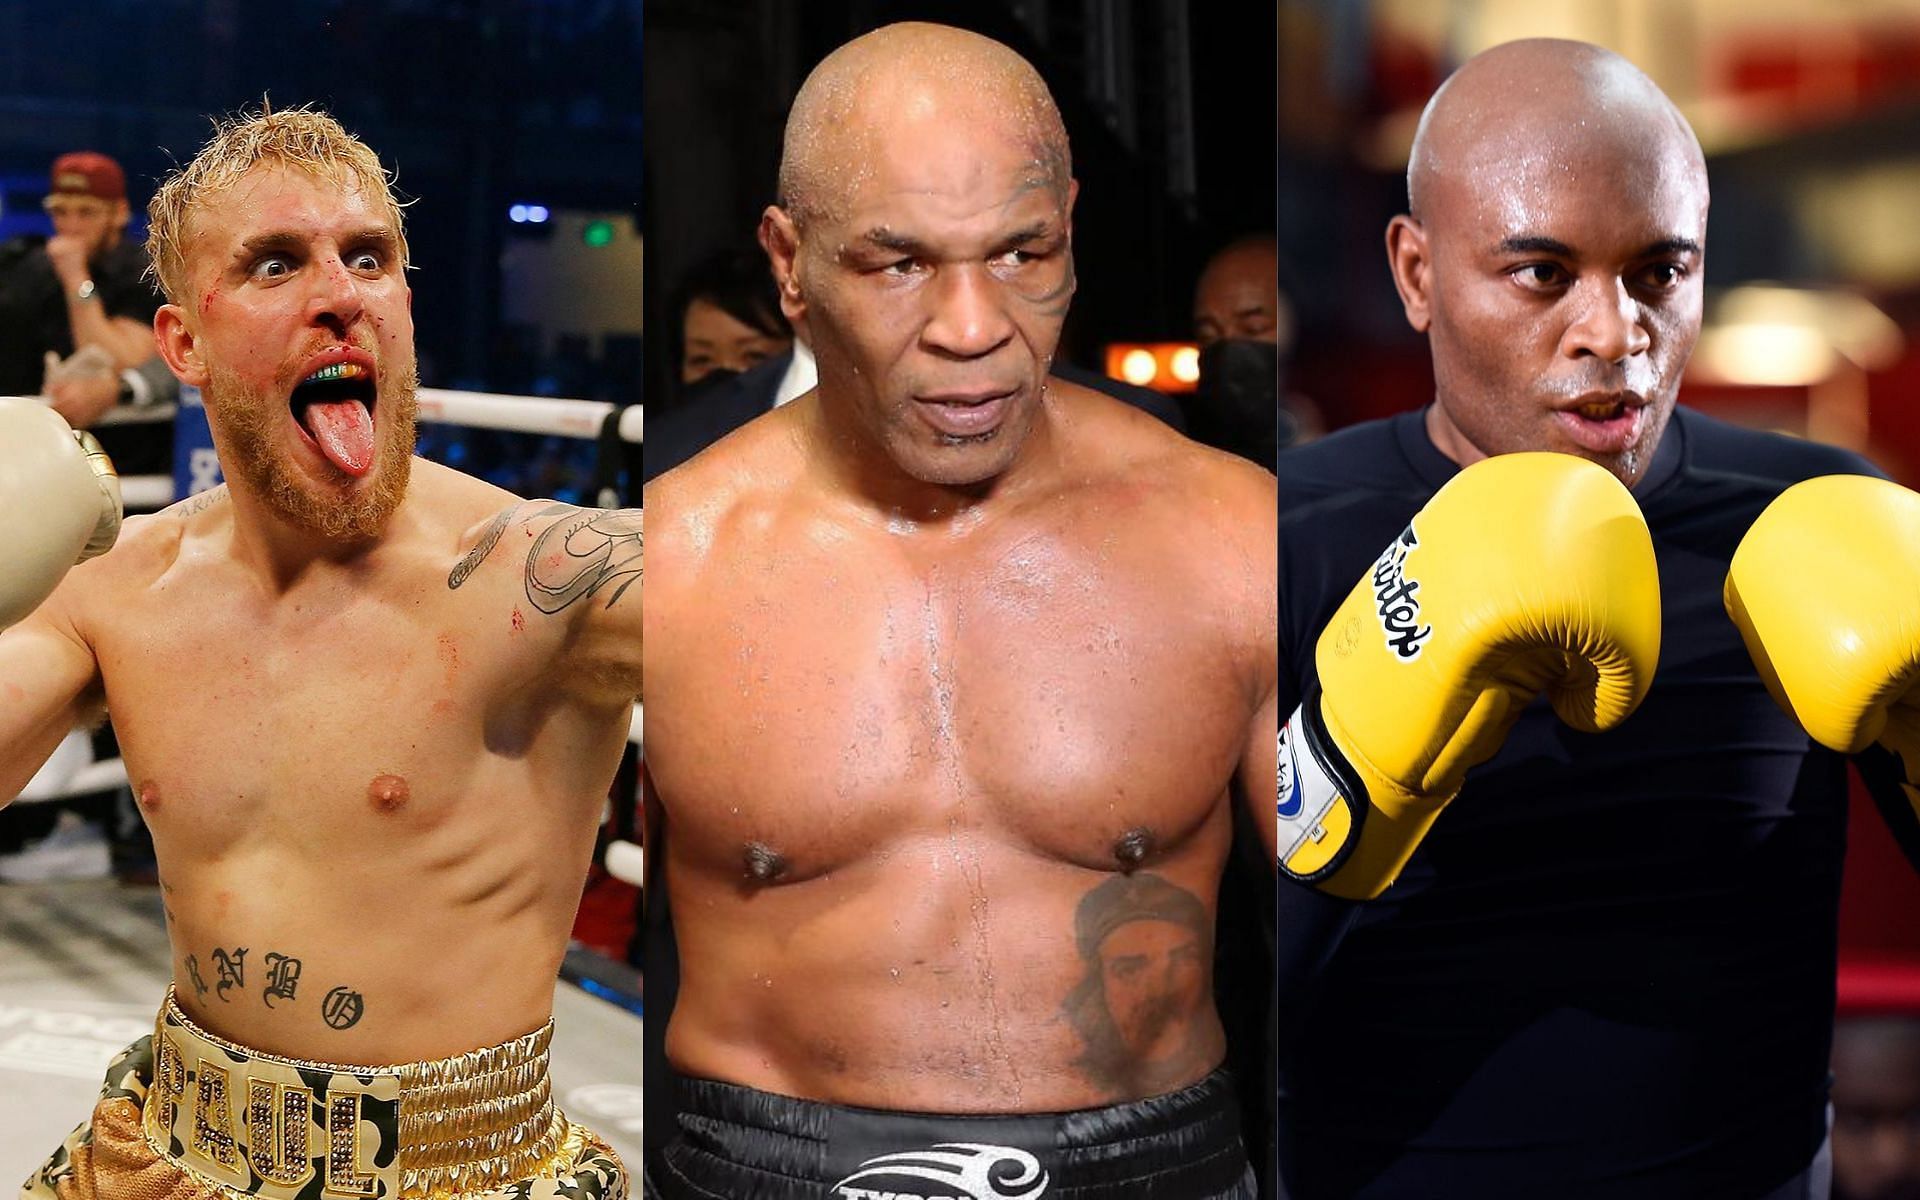 Jake Paul, Mike Tyson, and Anderson Silva (left to right)